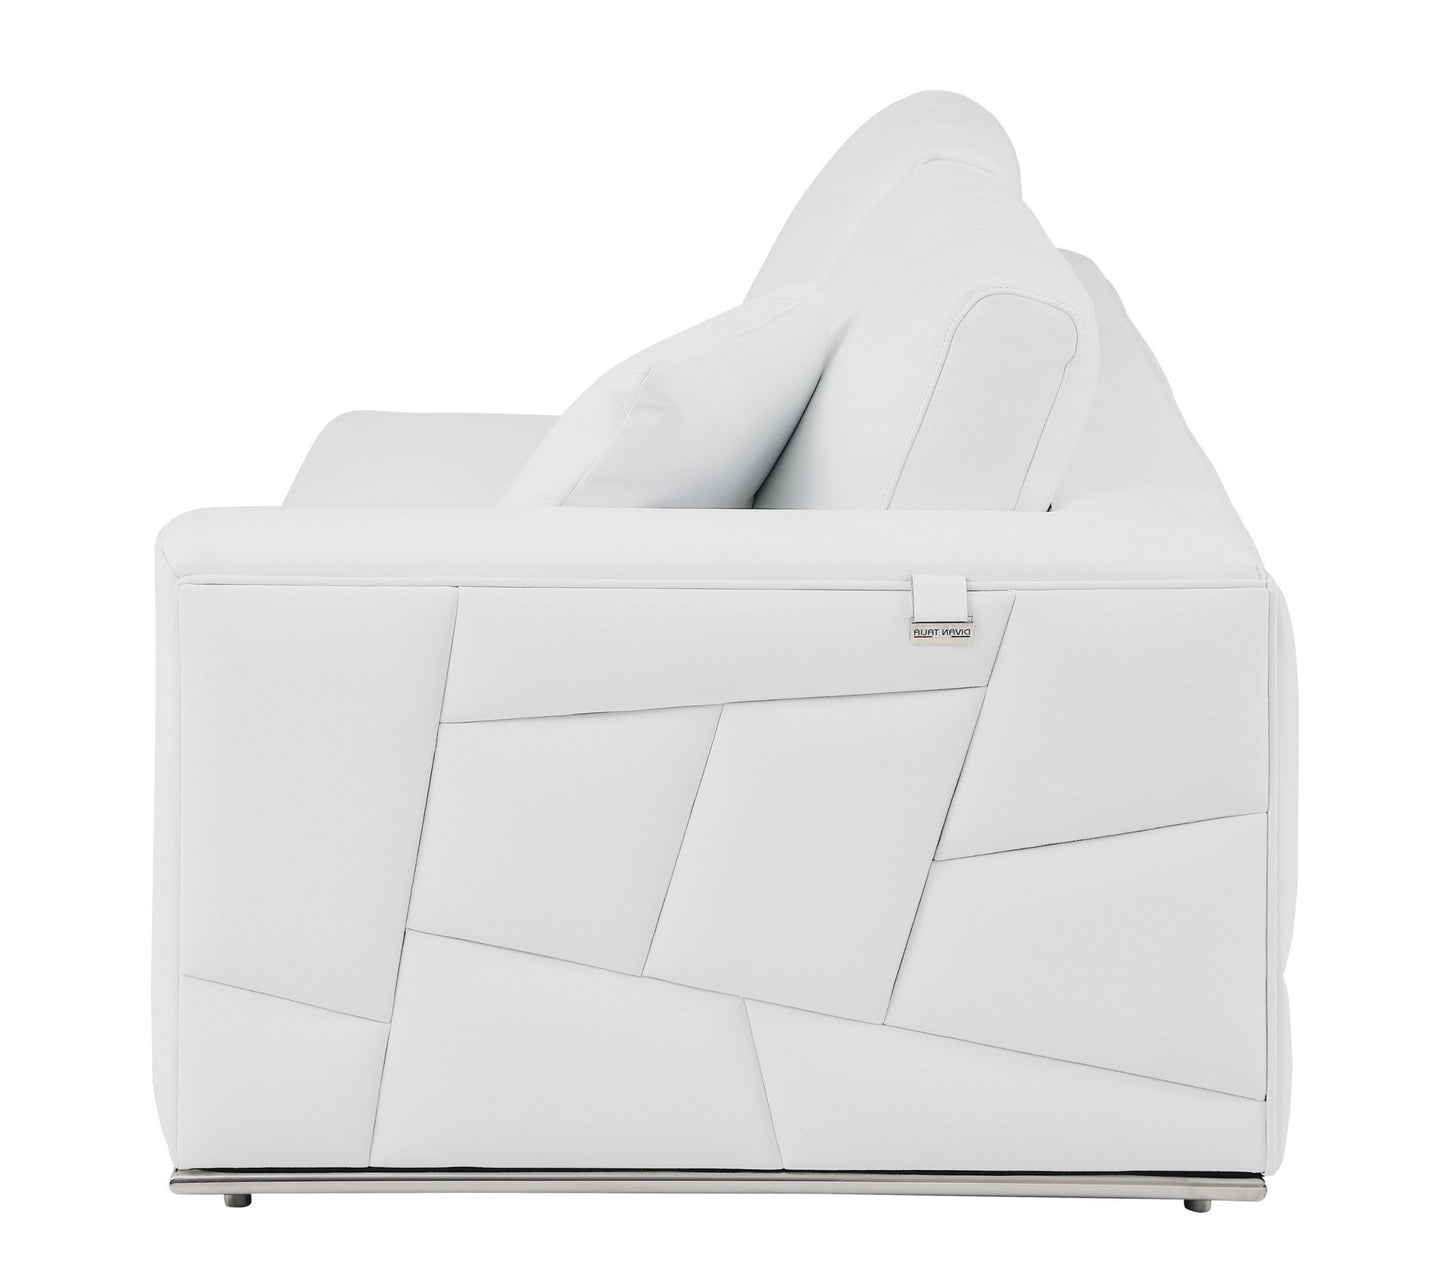 White Italian Leather Reclining L Shaped Two Piece Corner Sectional